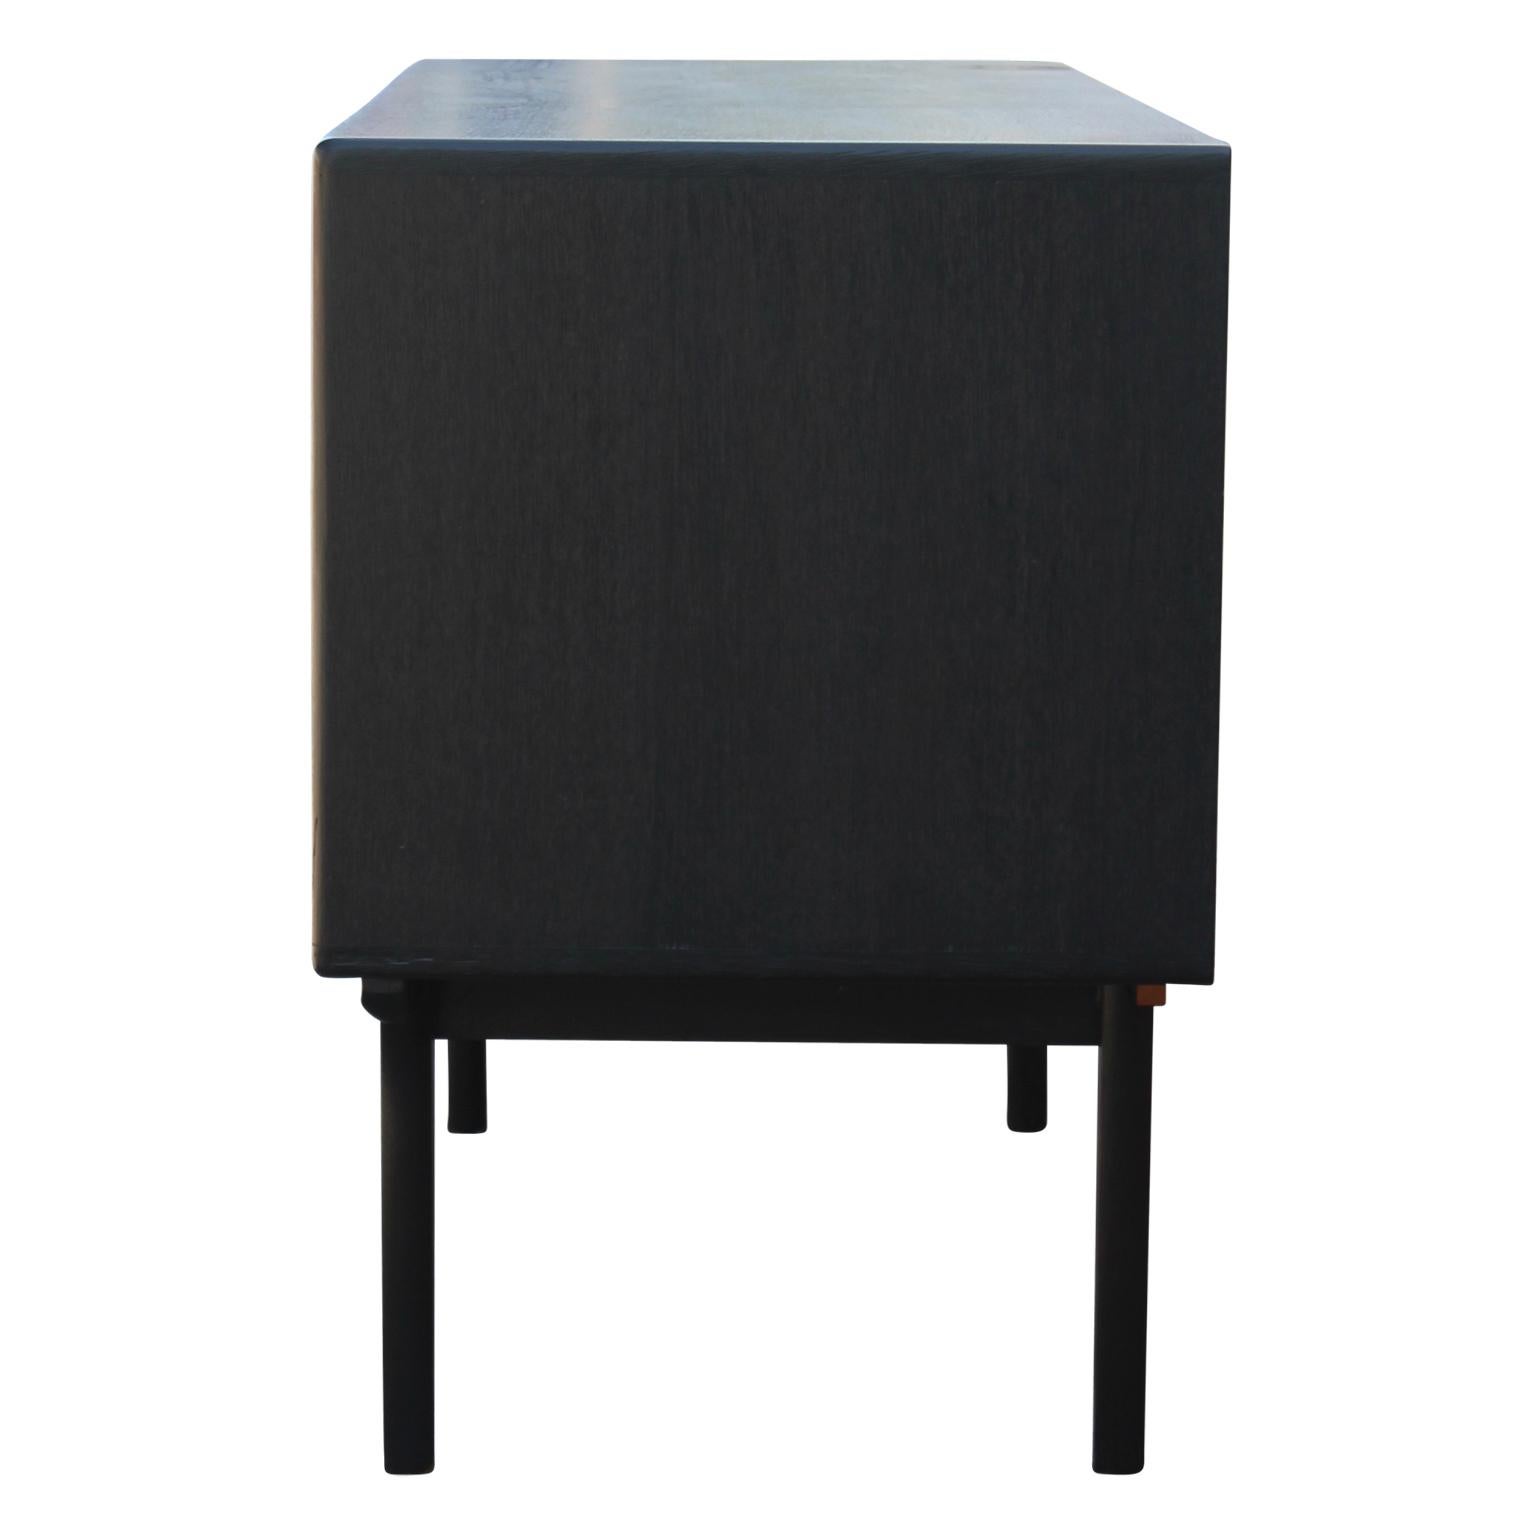 Mid-Century Modern Modern Two-Tone Black and Natural Credenza / Sideboard Brass Handles